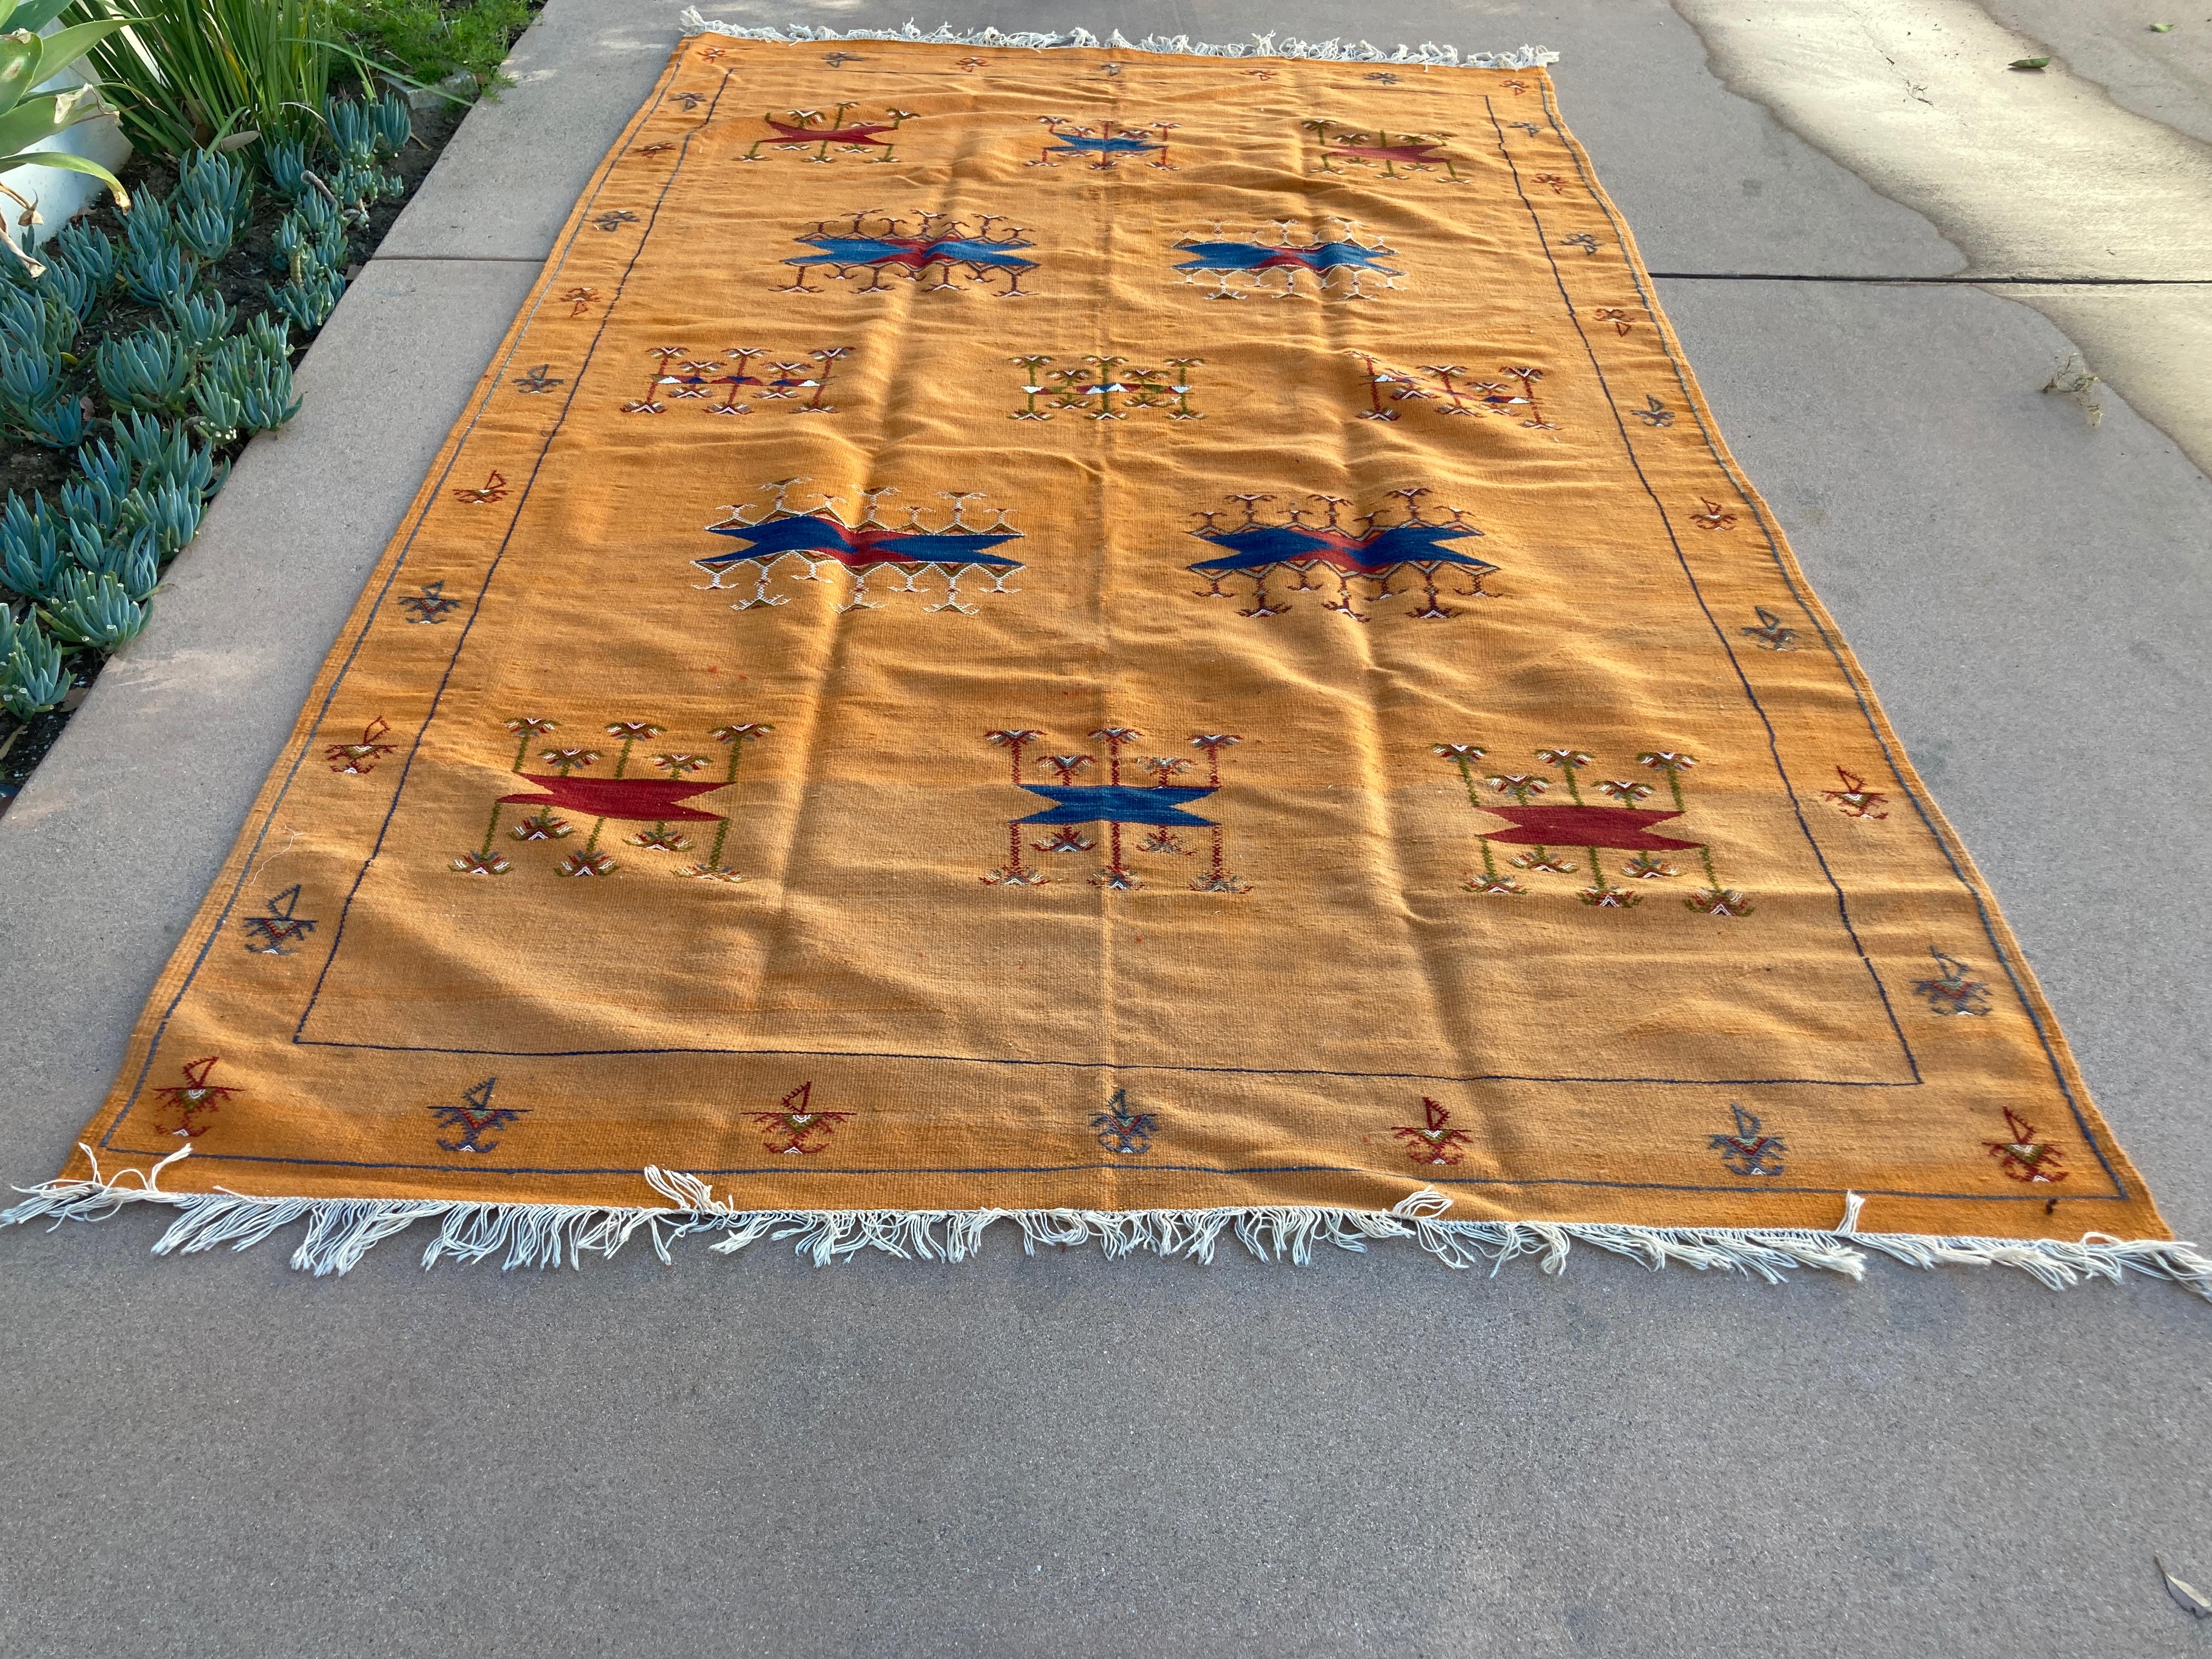 Vintage Moroccan flat-weave Kilim sunflower rug.
Minimalist Berber pattern on a yellow saffron color flat weave field.
Vintage light brown Moroccan rug, handwoven by Berber women in Morocco for their own use.
This rug was made using flat-weave